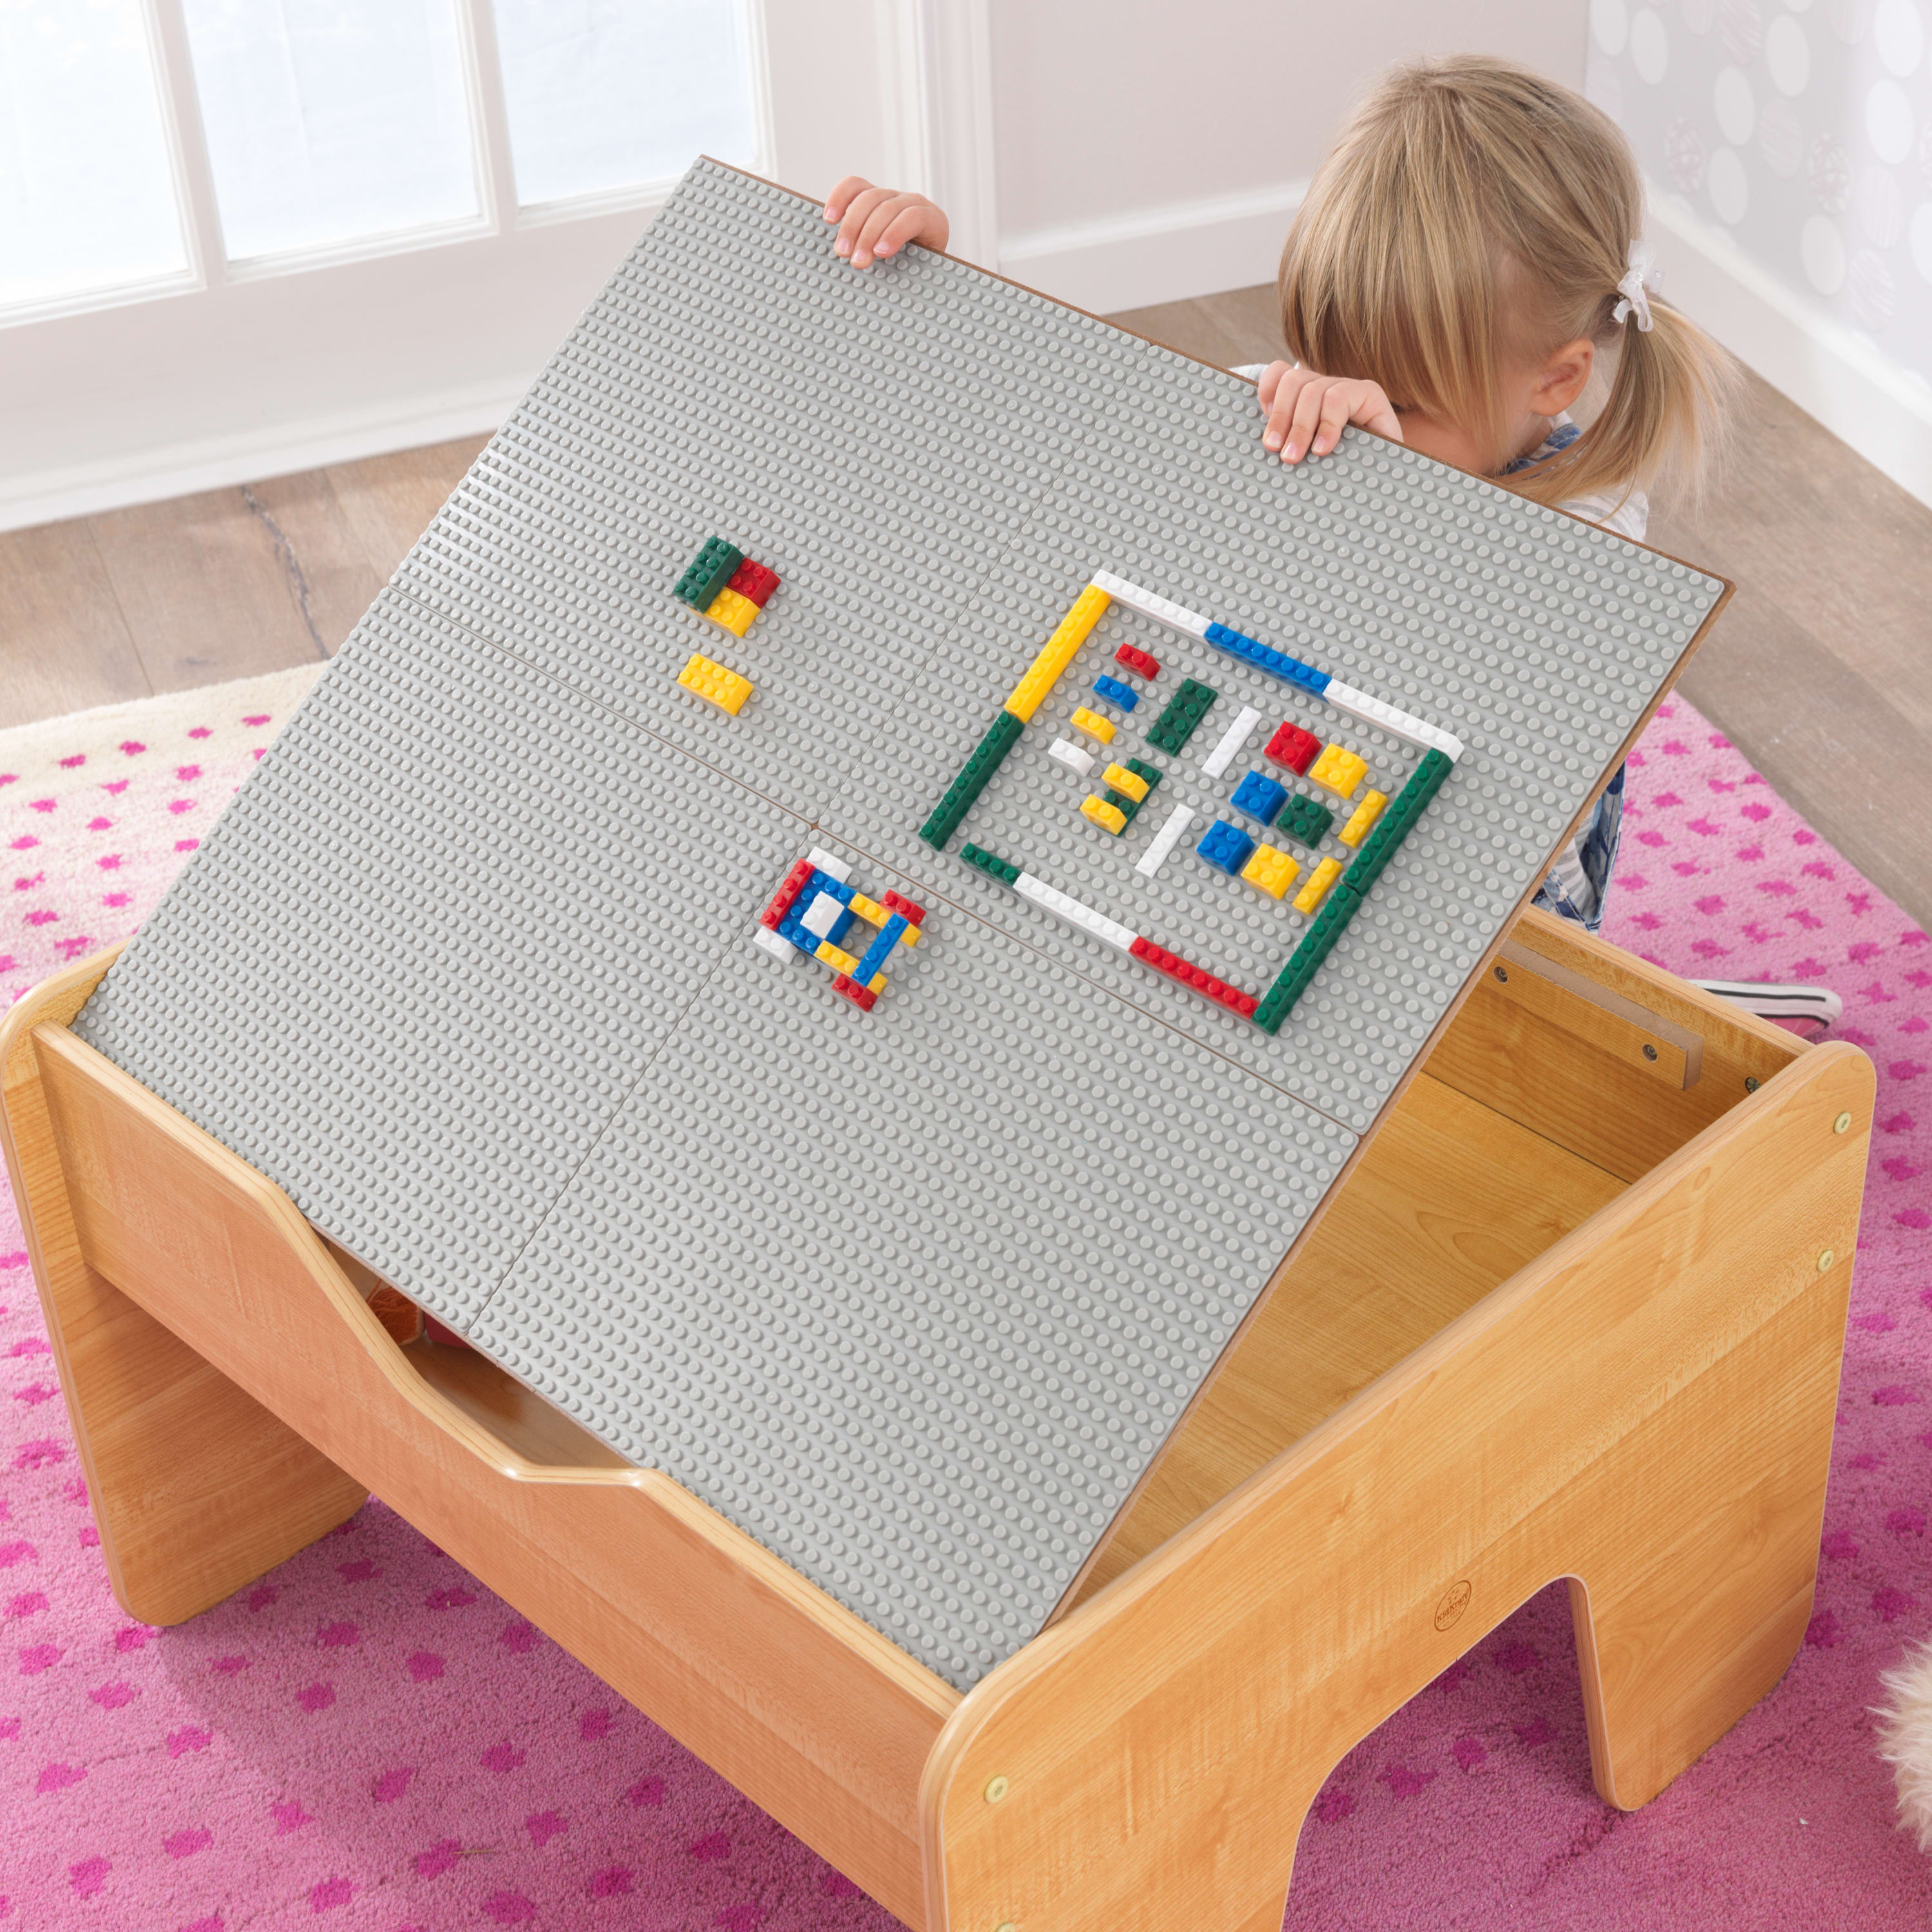 KidKraft Reversible Wooden Activity Table with 195 Building Bricks – Gray & Natural, For Ages 3+ - image 5 of 10